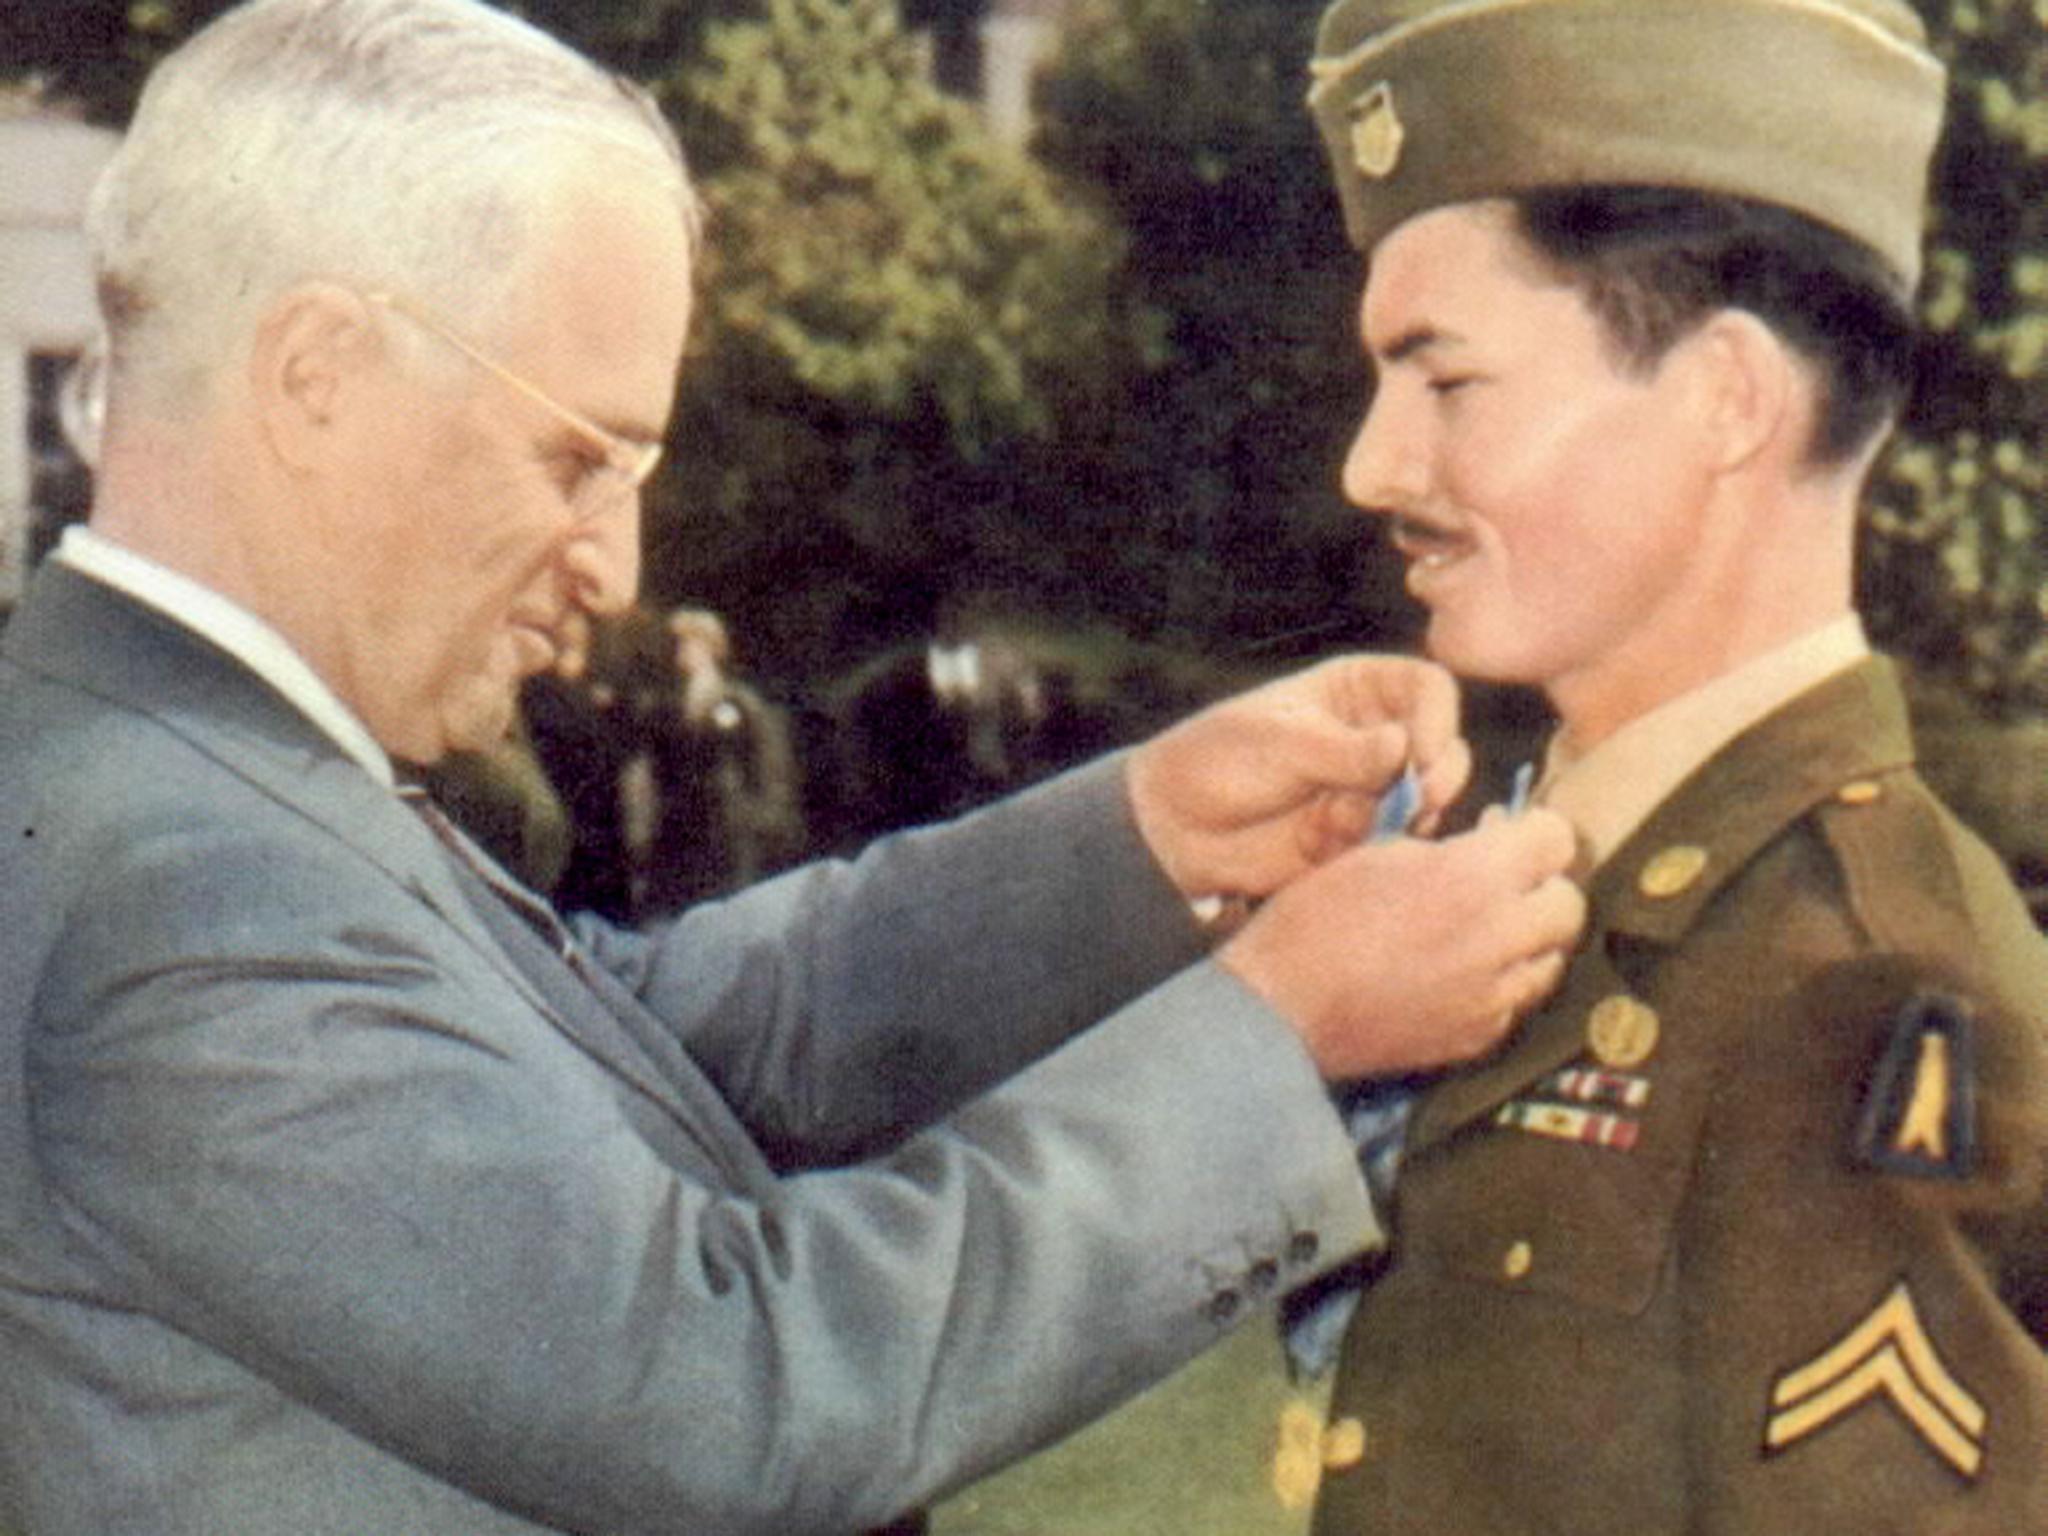 Corporal Doss receiving the Medal of Honour from President Harry S Truman on 12 October 1945